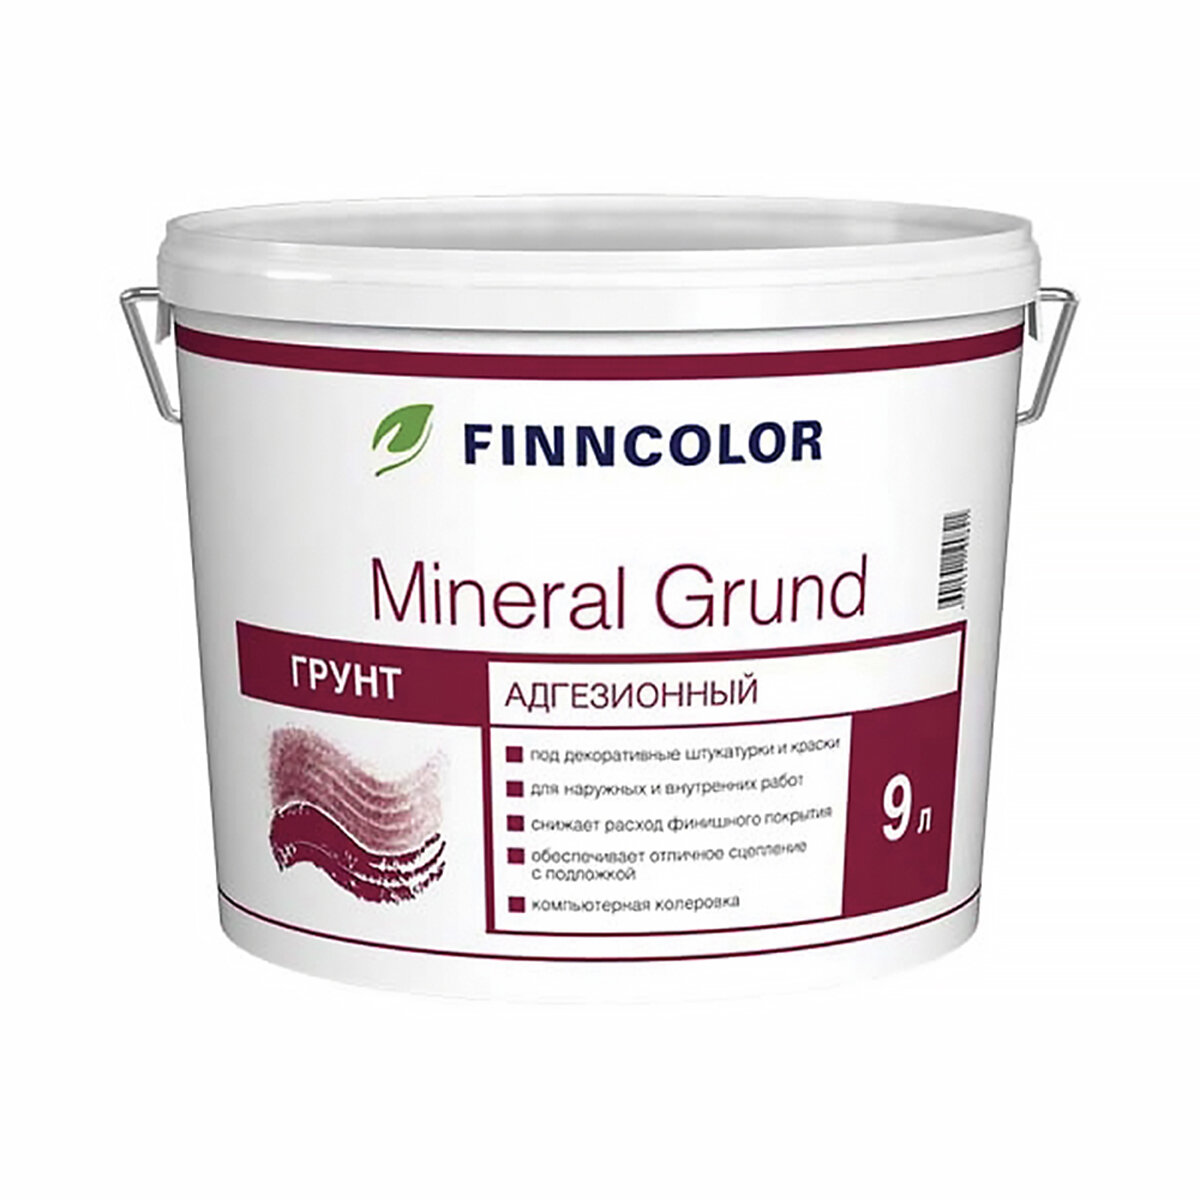      Finncolor Mineral Grund RPA, 9 